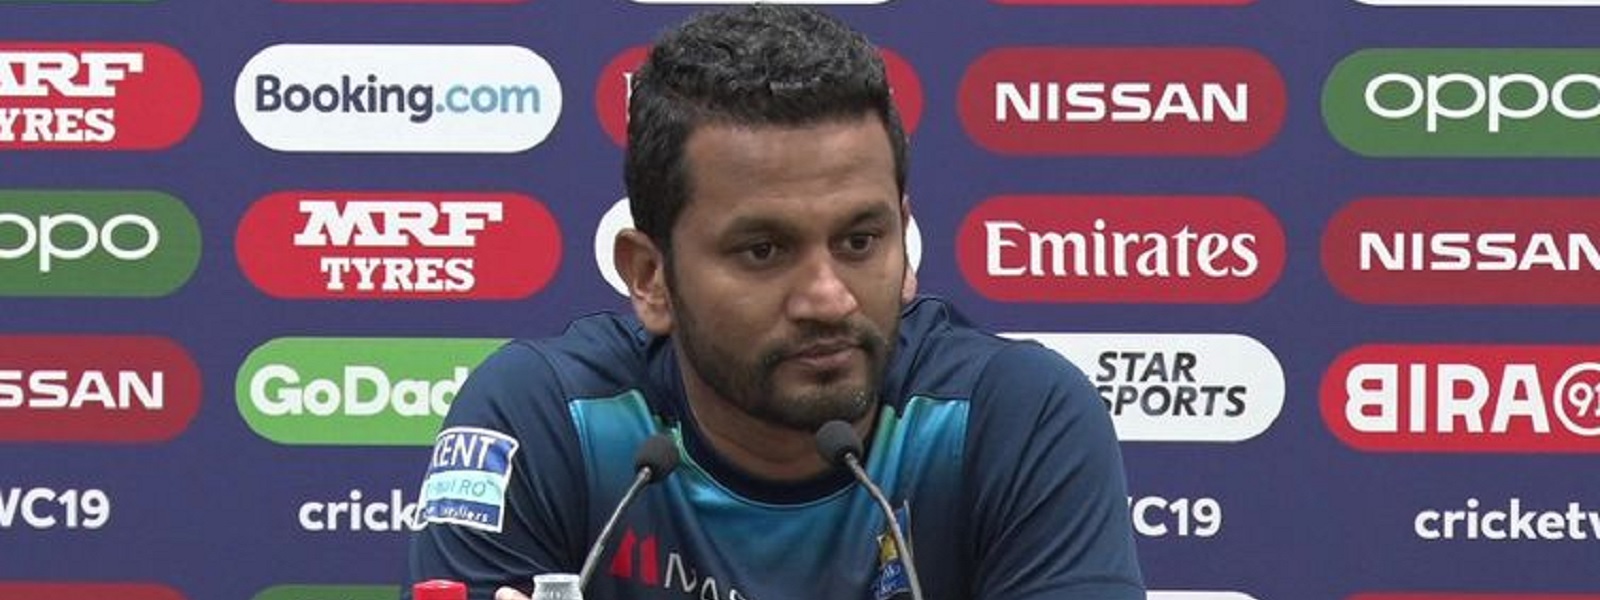 We just needed a win; now just need to focus – Dimuth Karunaratne